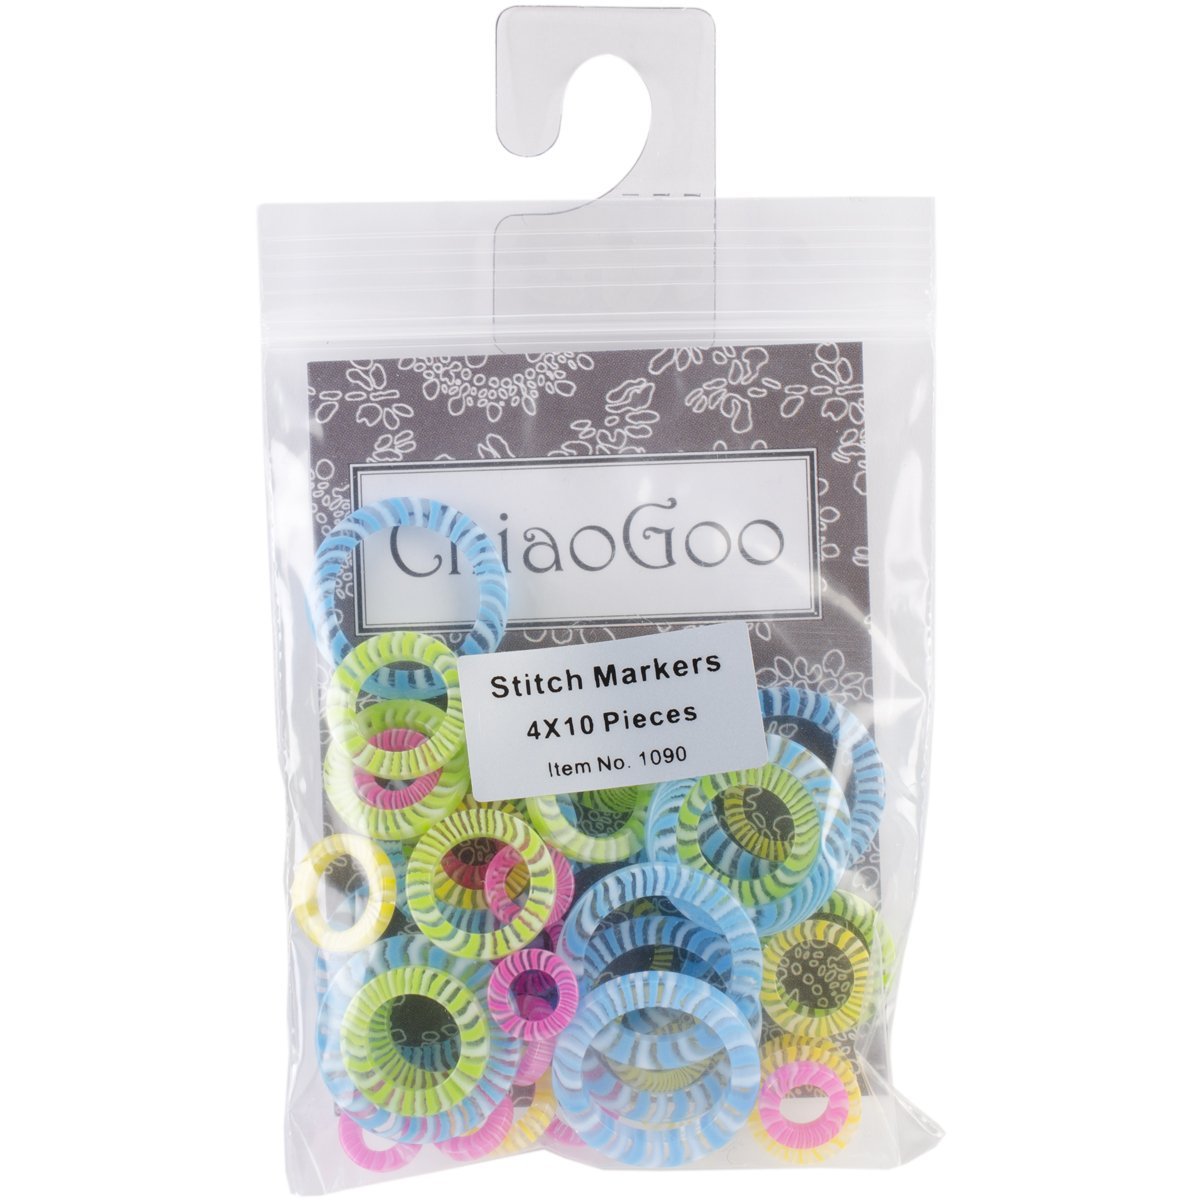 ChiaoGoo Stitch Markers 10 Each Of 4 Sizes 40 Colorful Closed Rings